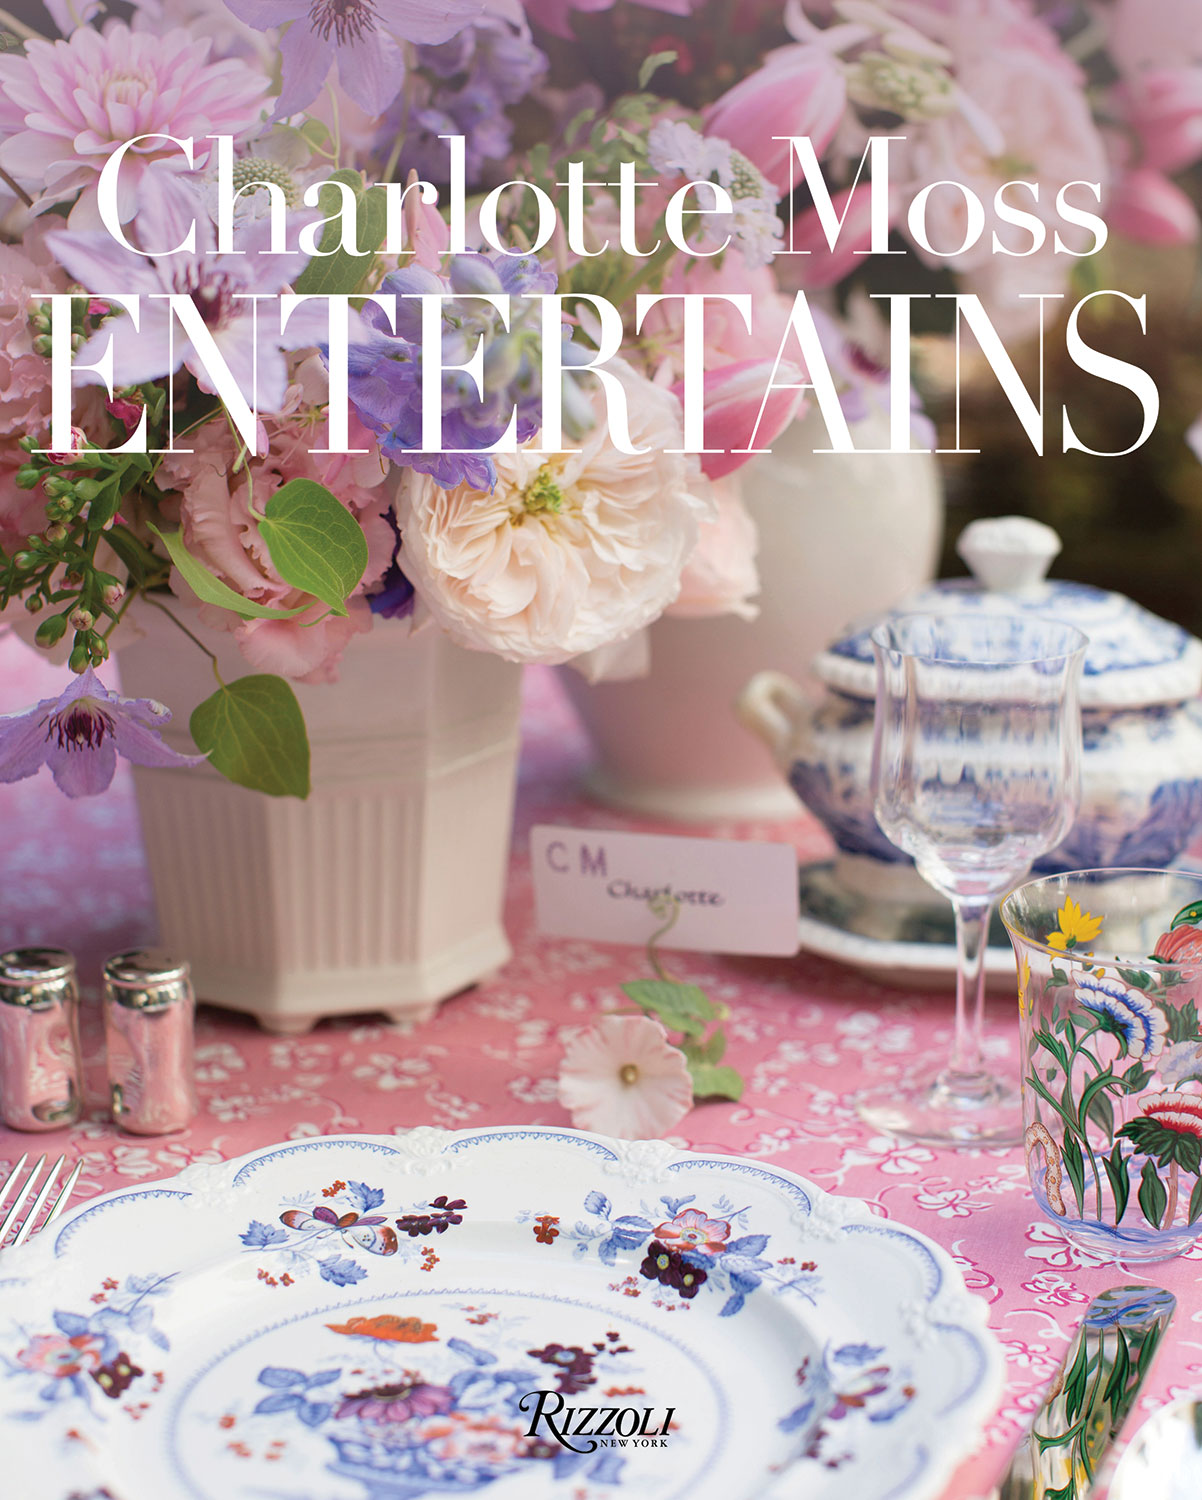 book cover for Charlotte Moss Entertains